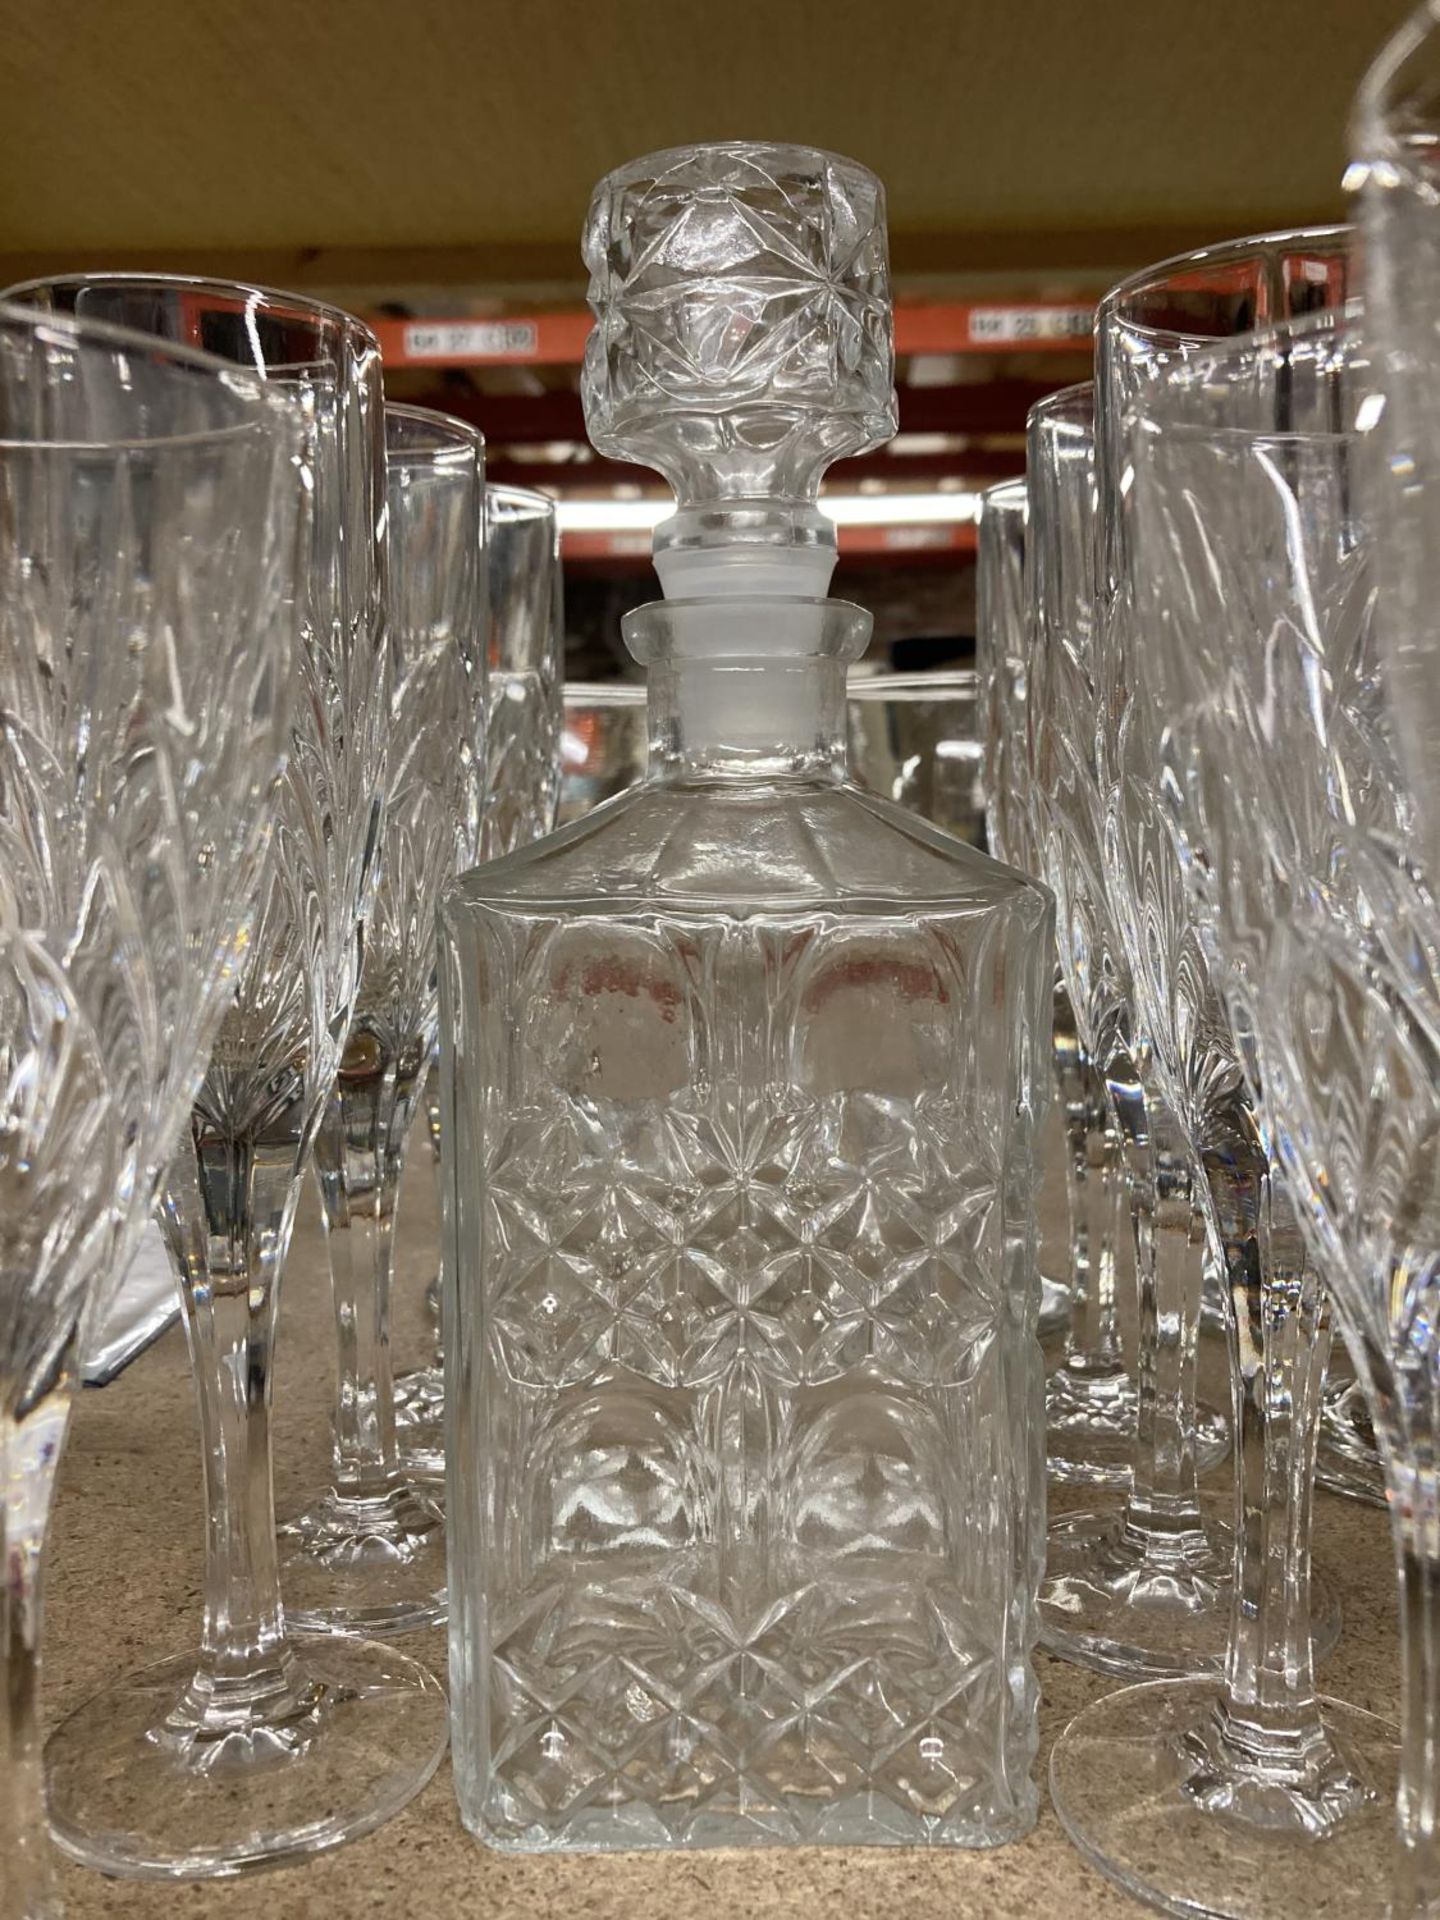 A QUANTITY OF GLASSES TO INCLUDE A DECANTER, CHAMPAGNE FLUTES, WINE GLASSES, ETC - Image 2 of 3